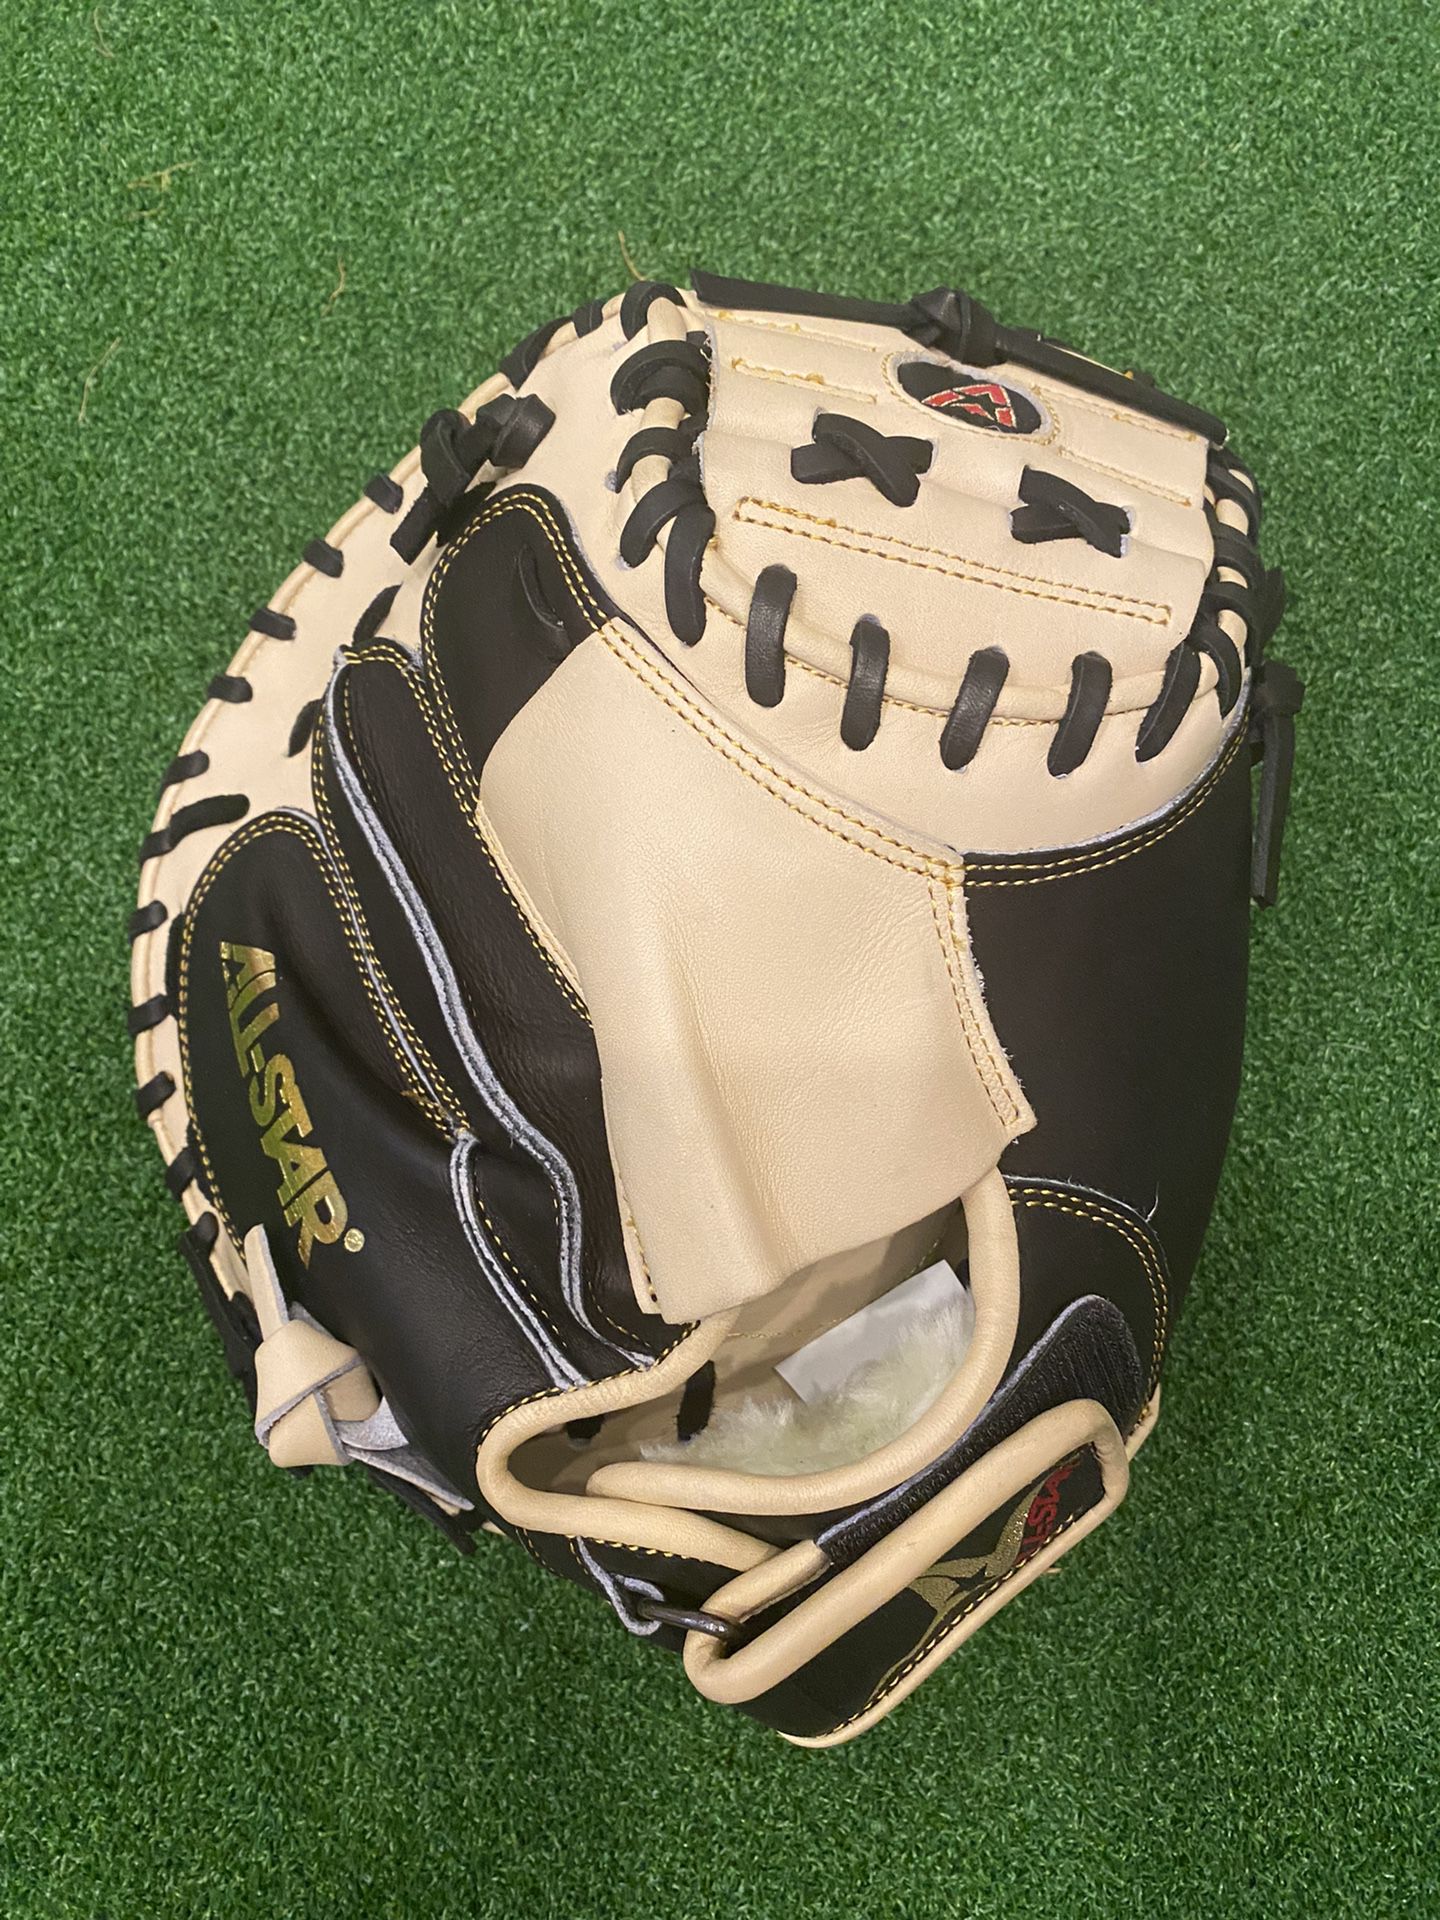 New With Tags Allstar Pro-Elite Youth 31.5 Catchers Mitt